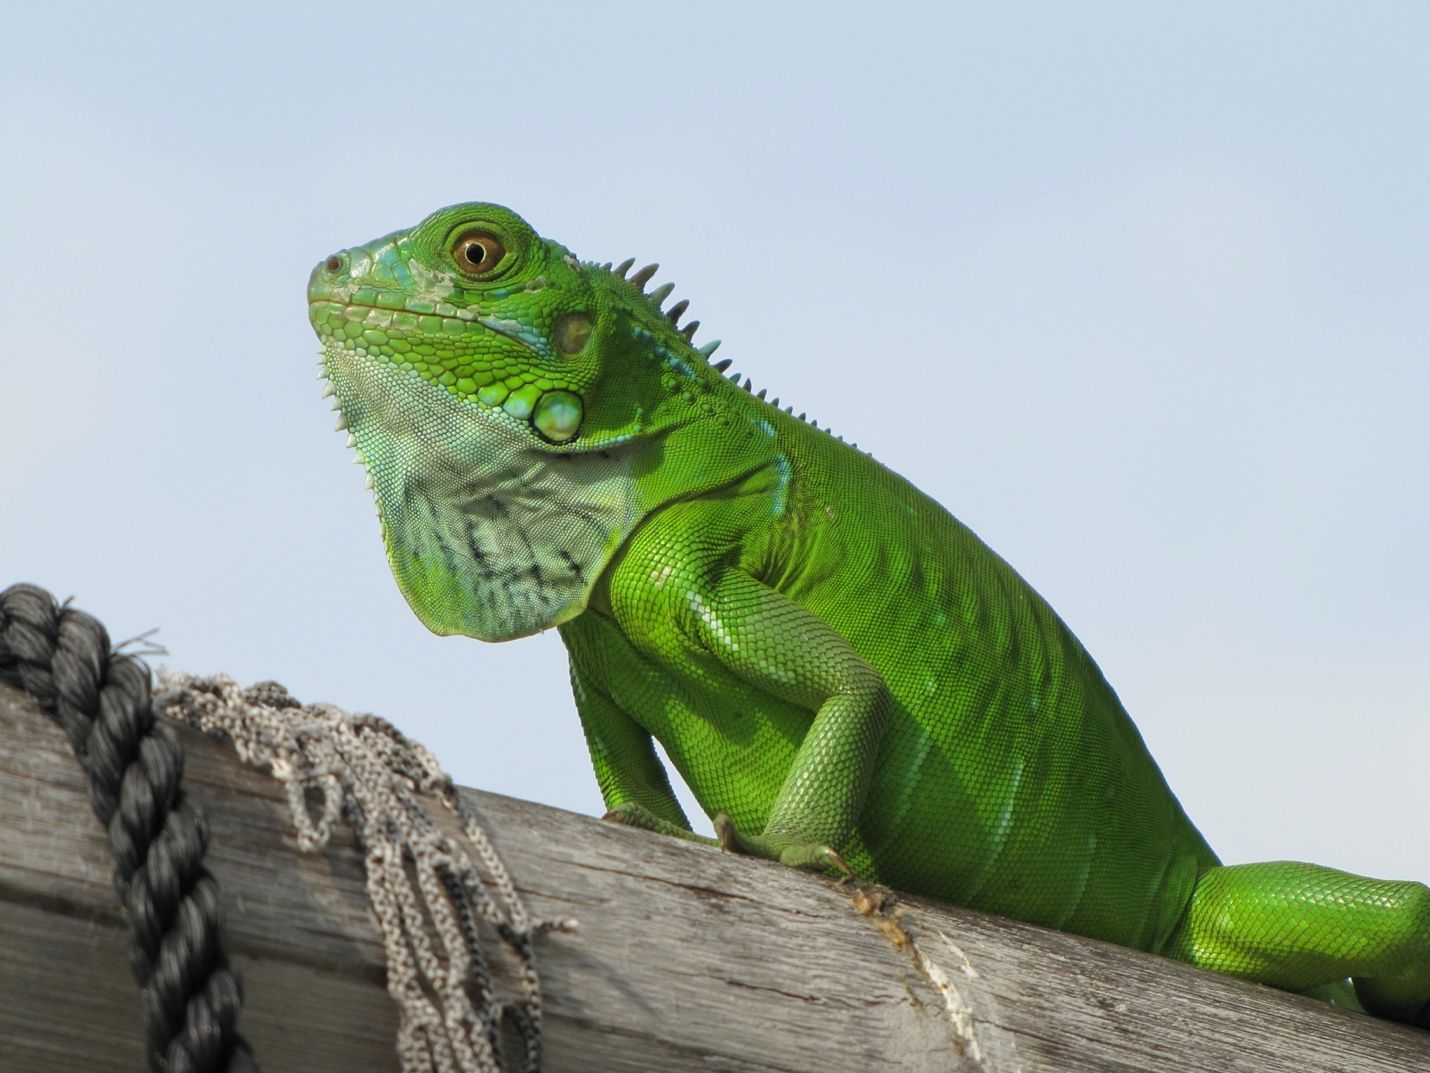 Juvenile green iguanas (Iguana iguana) are a bold green color, such as this individual from Key Largo, Florida. 